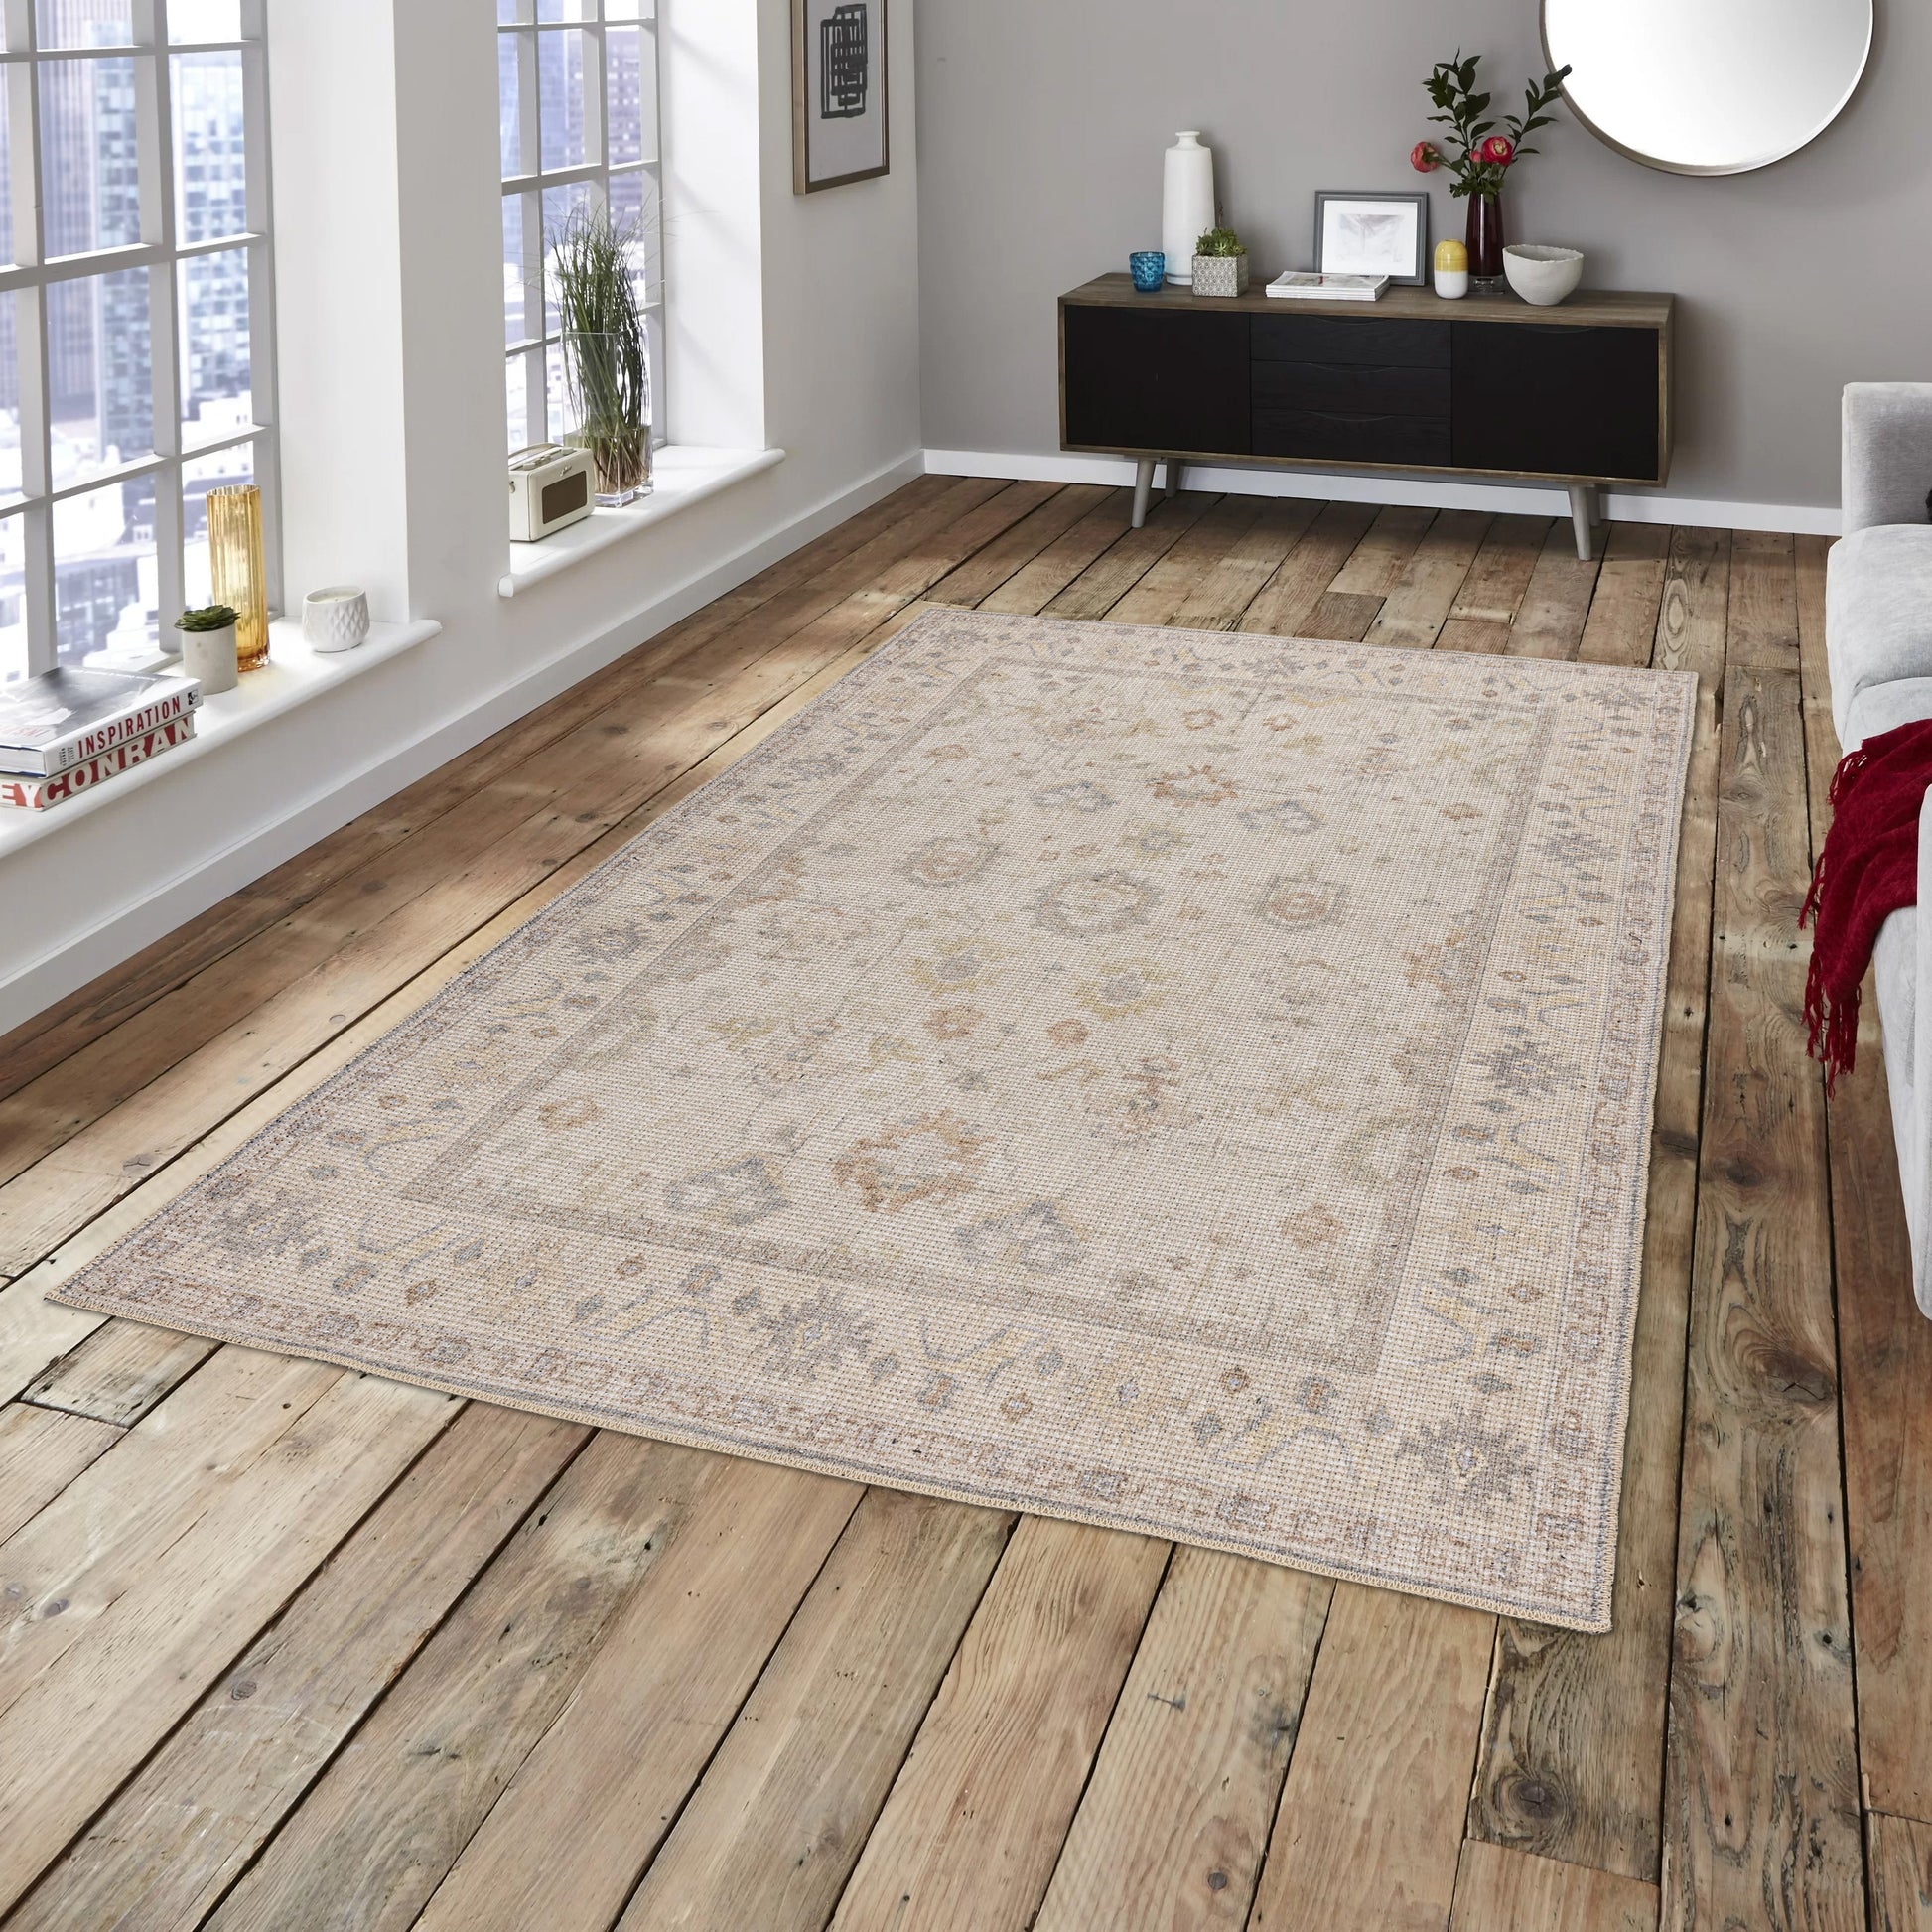 brown boho cotton and polyster machine washable traditional rustic area rug 6x8, 6x9 ft Living Room, Bedroom, Dining Area, Kitchen Carpet